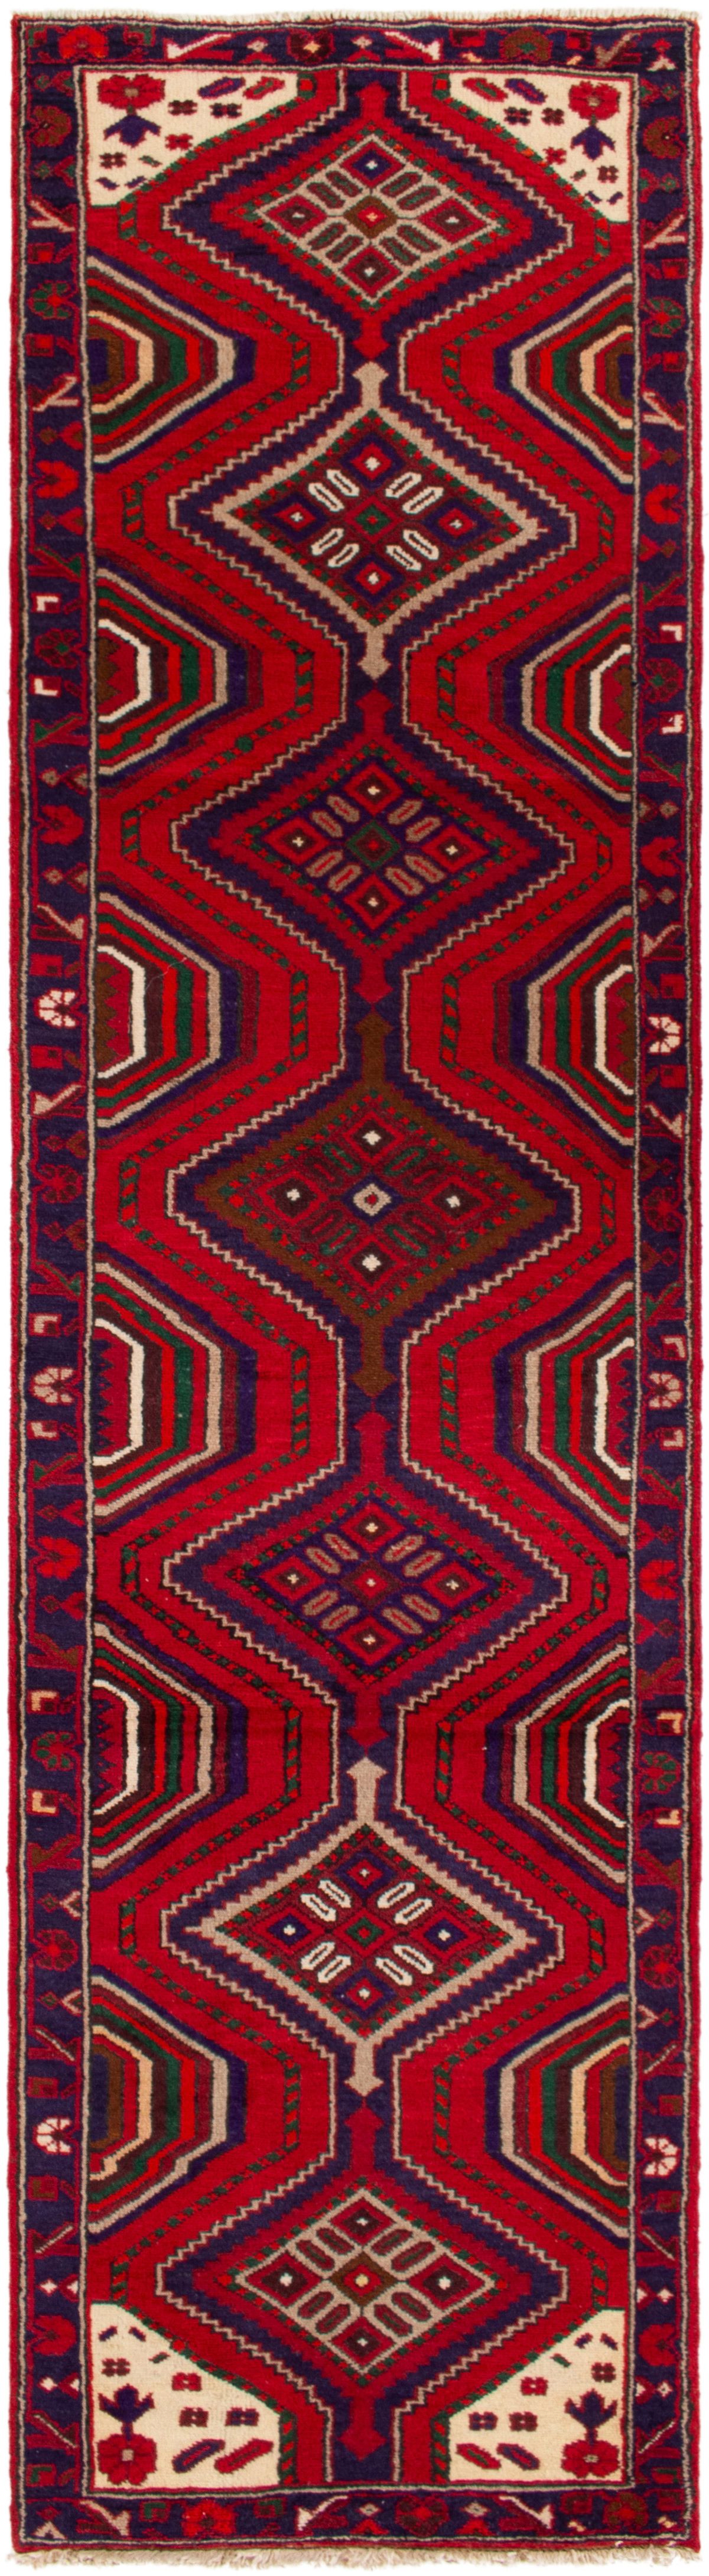 Hand-knotted Saveh  Wool Rug 2'6" x 9'11" Size: 2'6" x 9'11"  